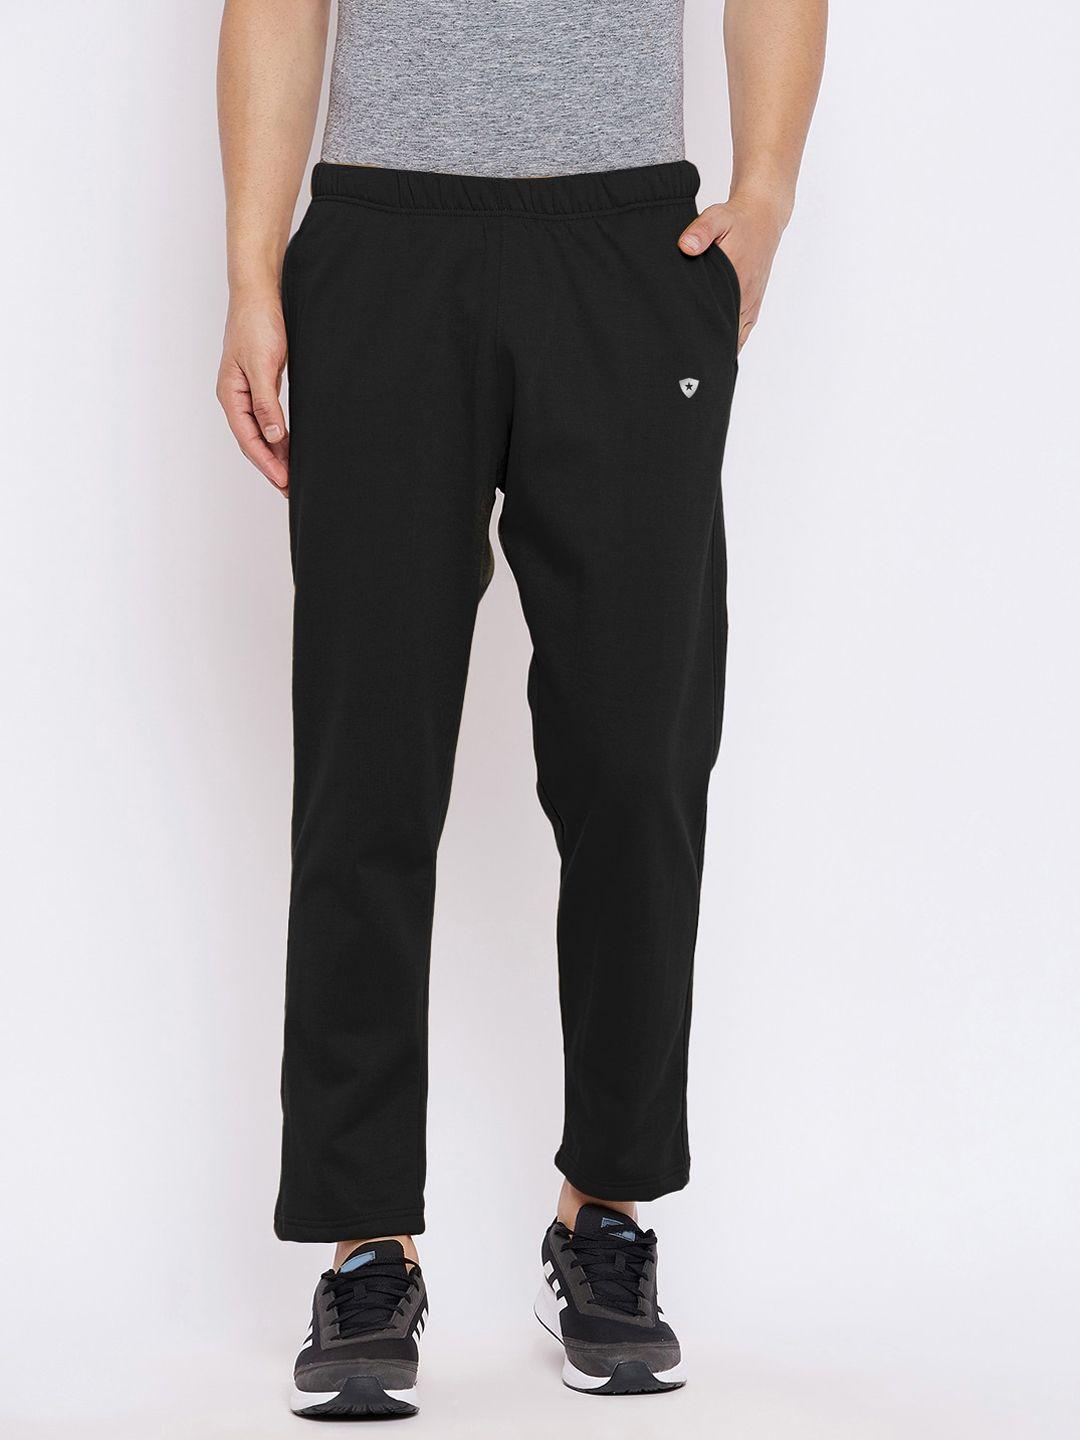 french flexious men black solid relaxed fit track pants